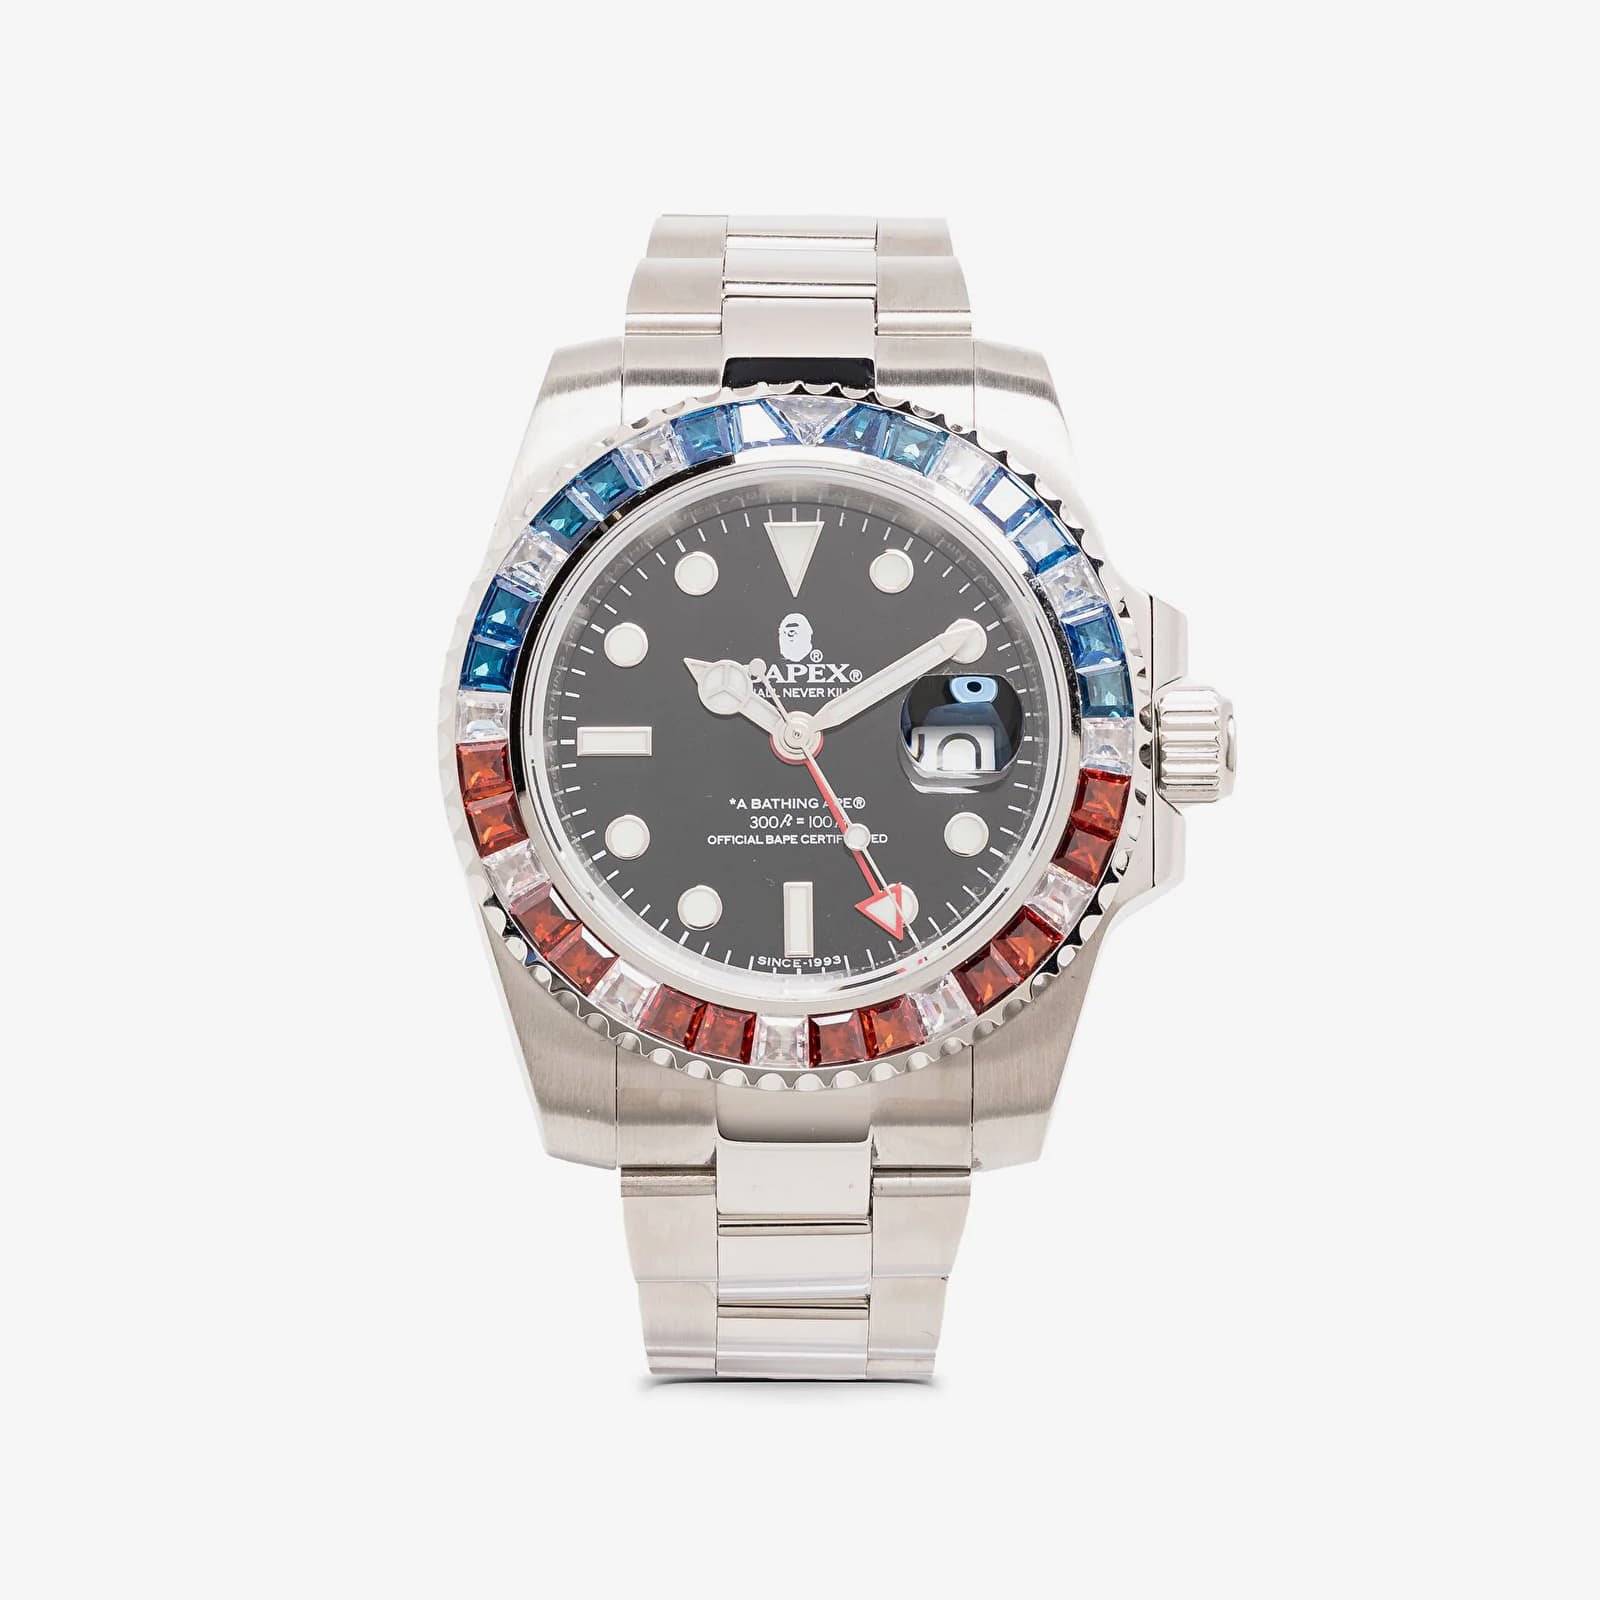 BAPE A BATHING APE Type 2 Bapex Crystal Stone Watches Blue/ Red